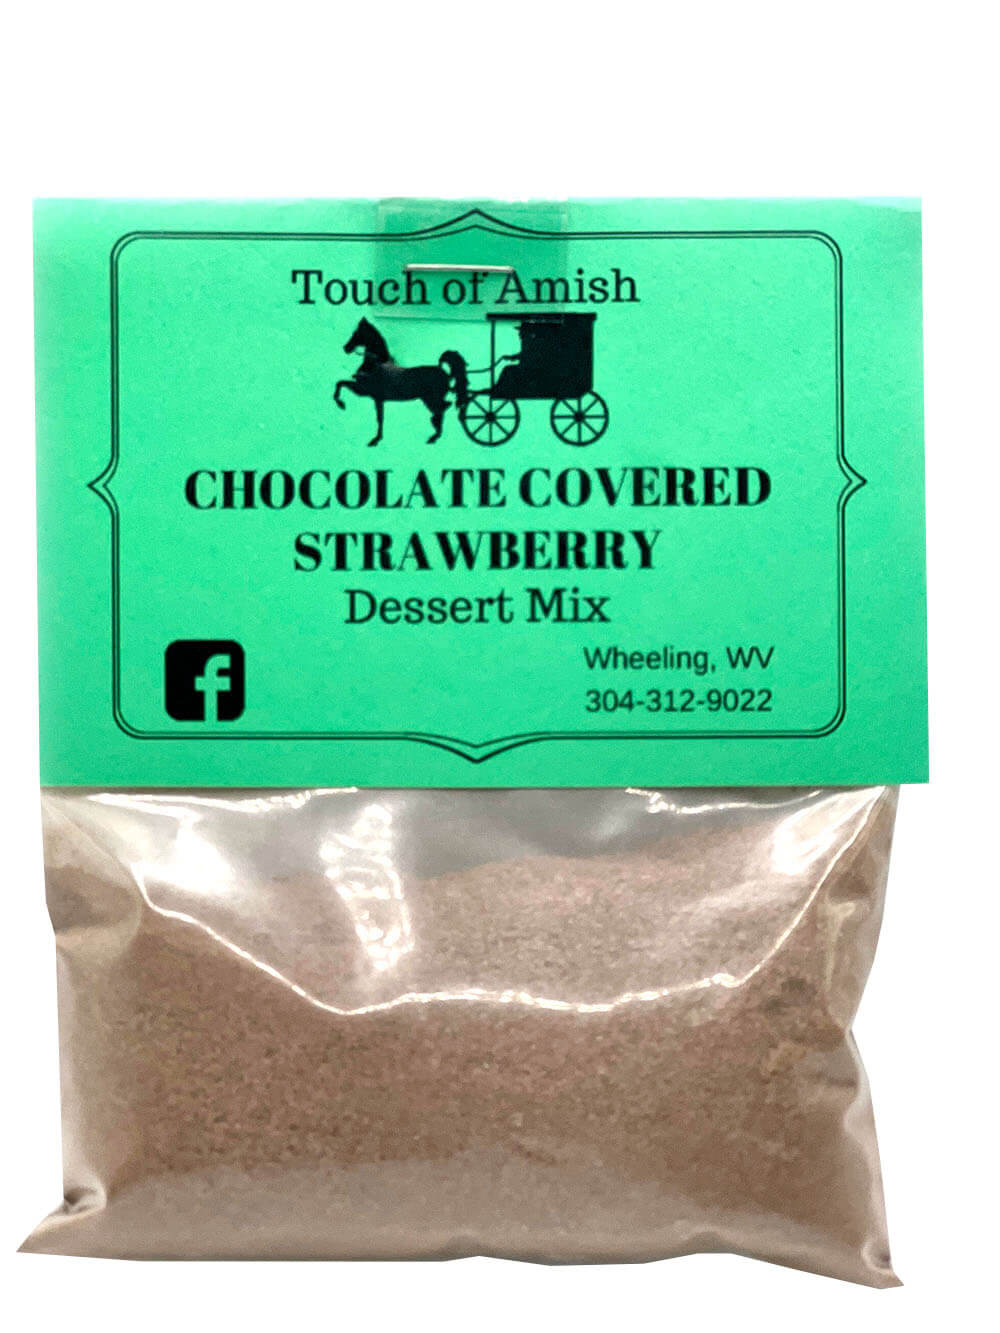 Chocolate Covered Strawberry Dessert Mix - Touch of Amish